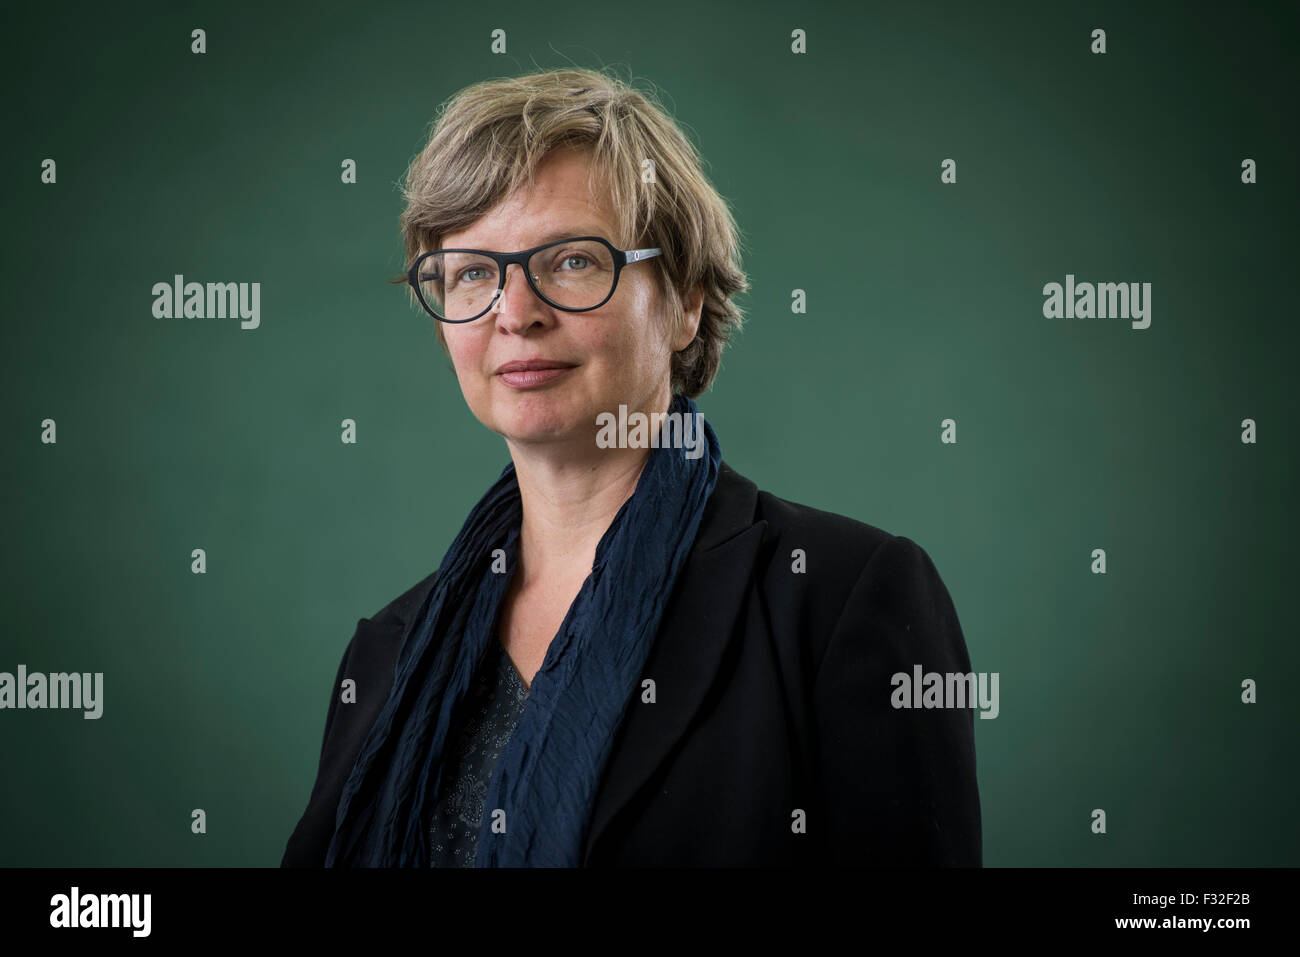 German director and writer Jenny Erpenbeck. Stock Photo